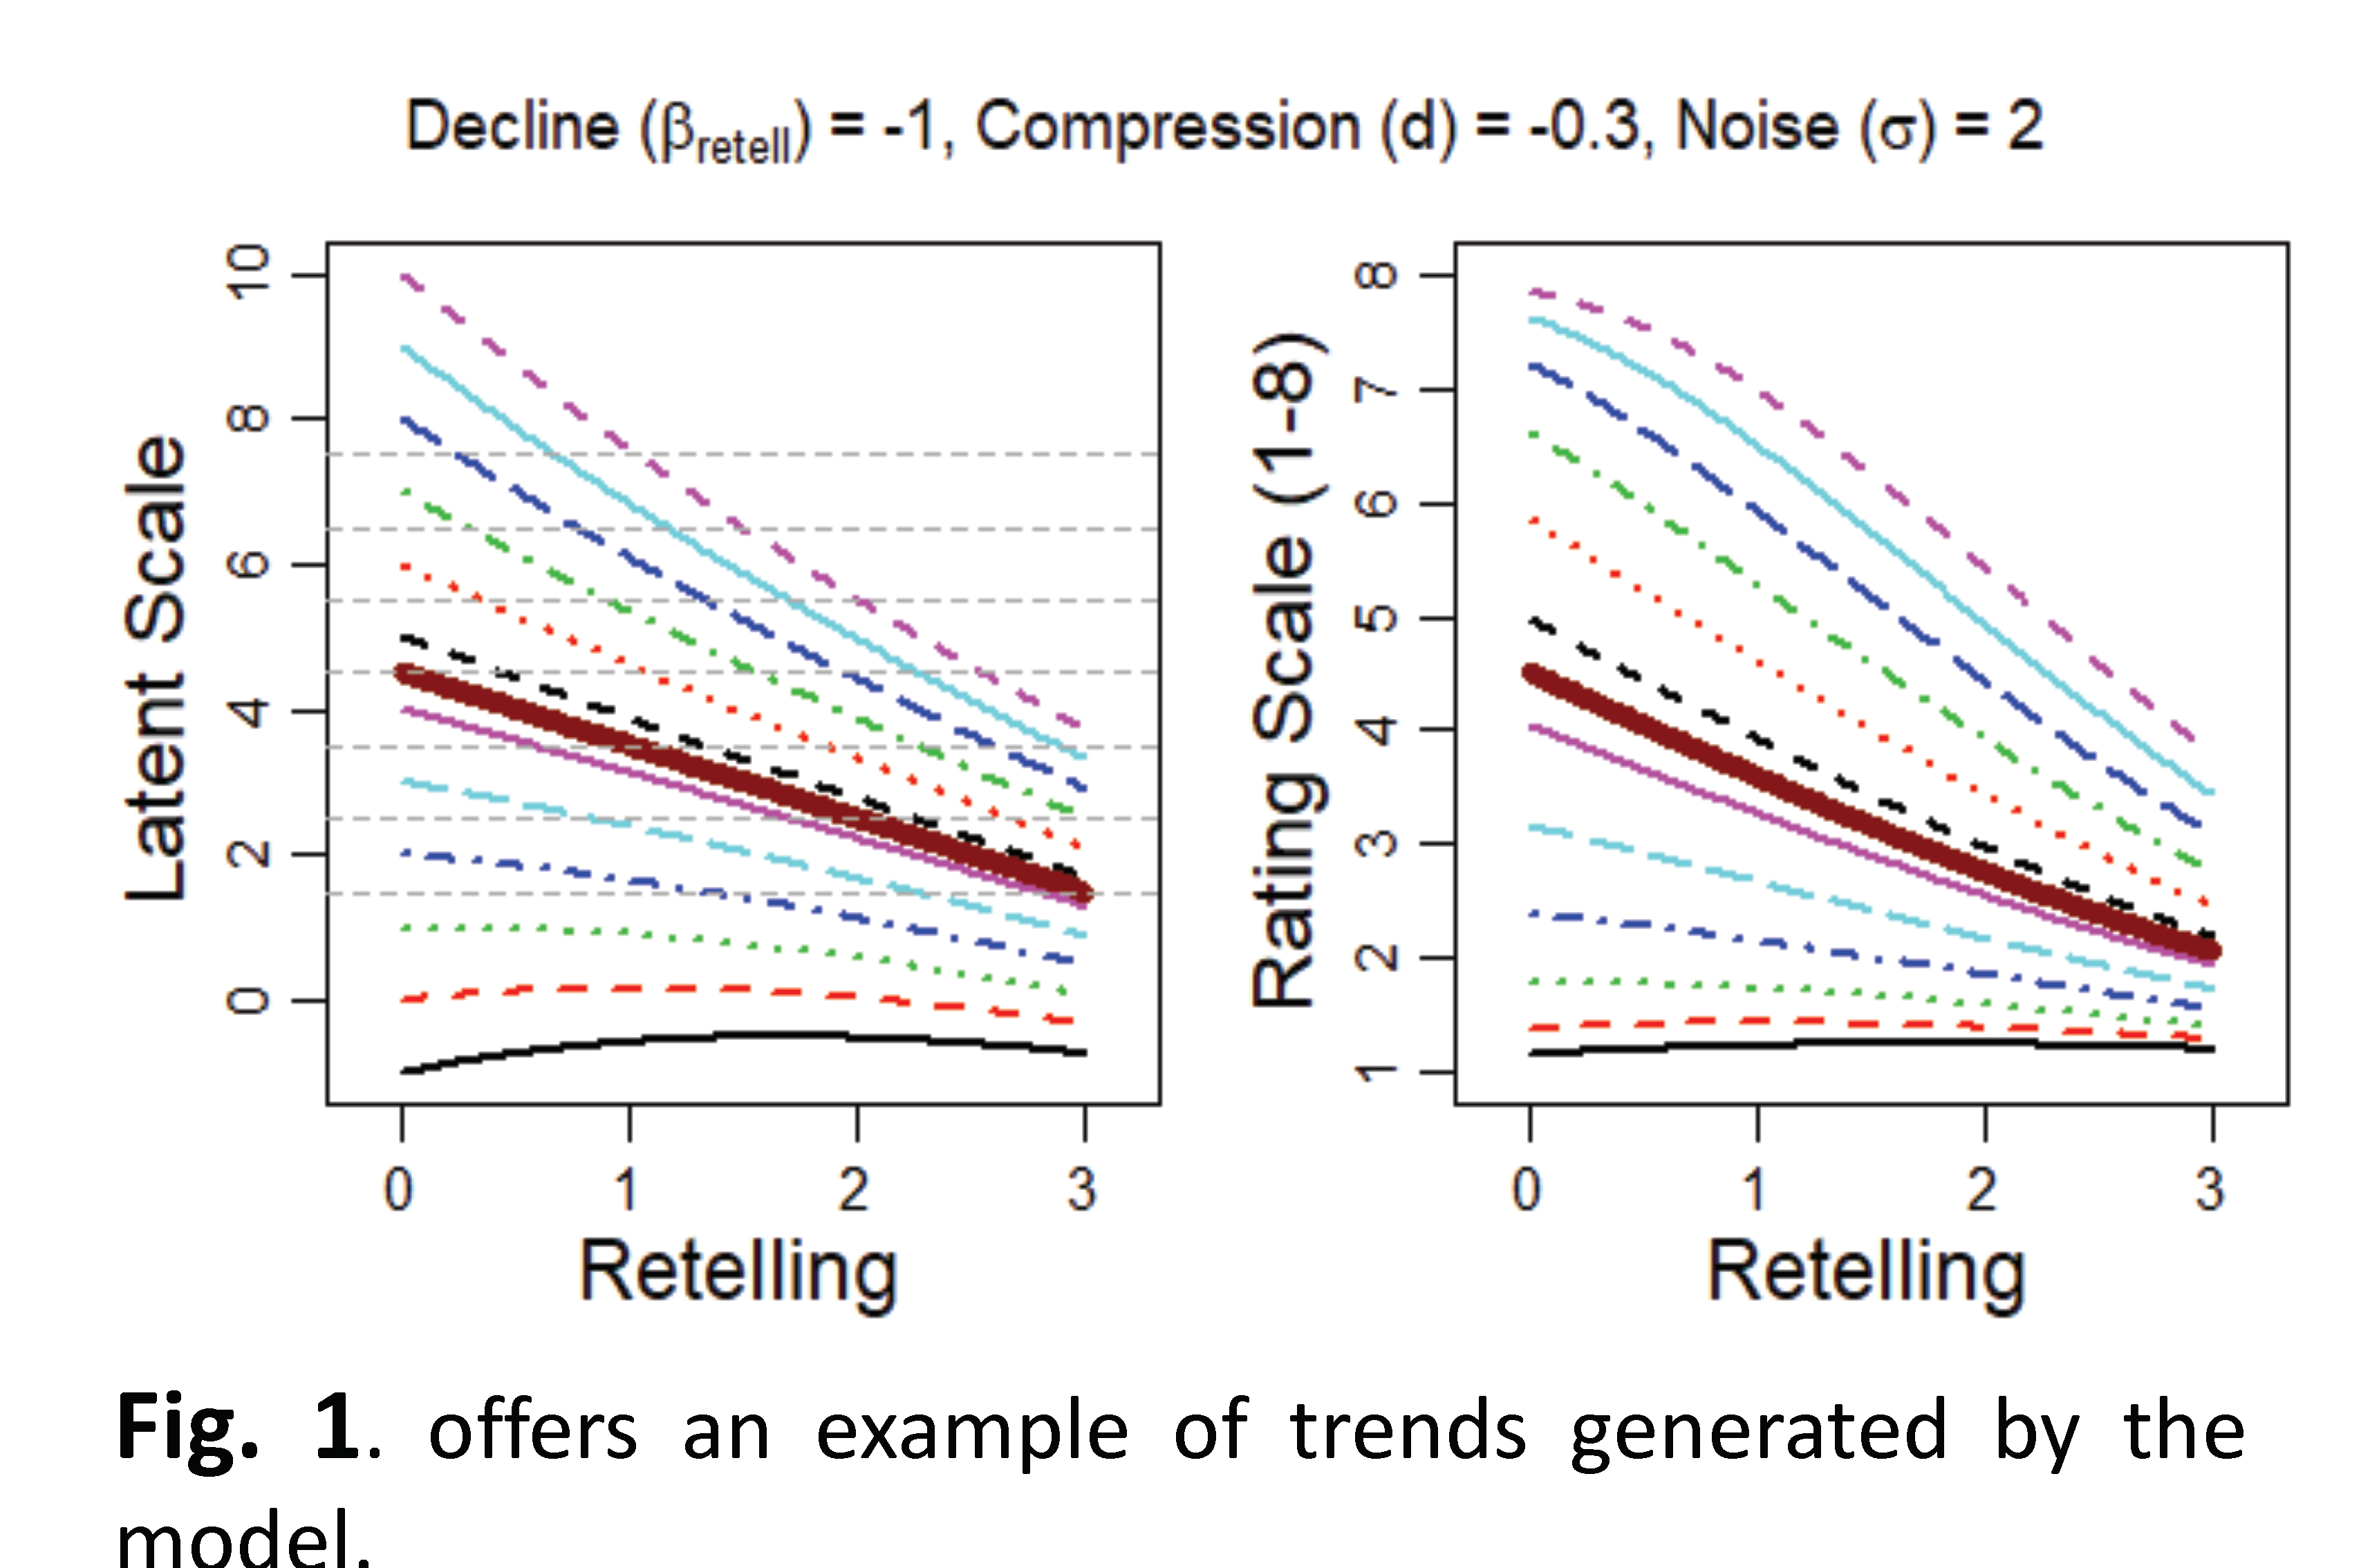 Offers an example of trends generated by the model in decline and compression